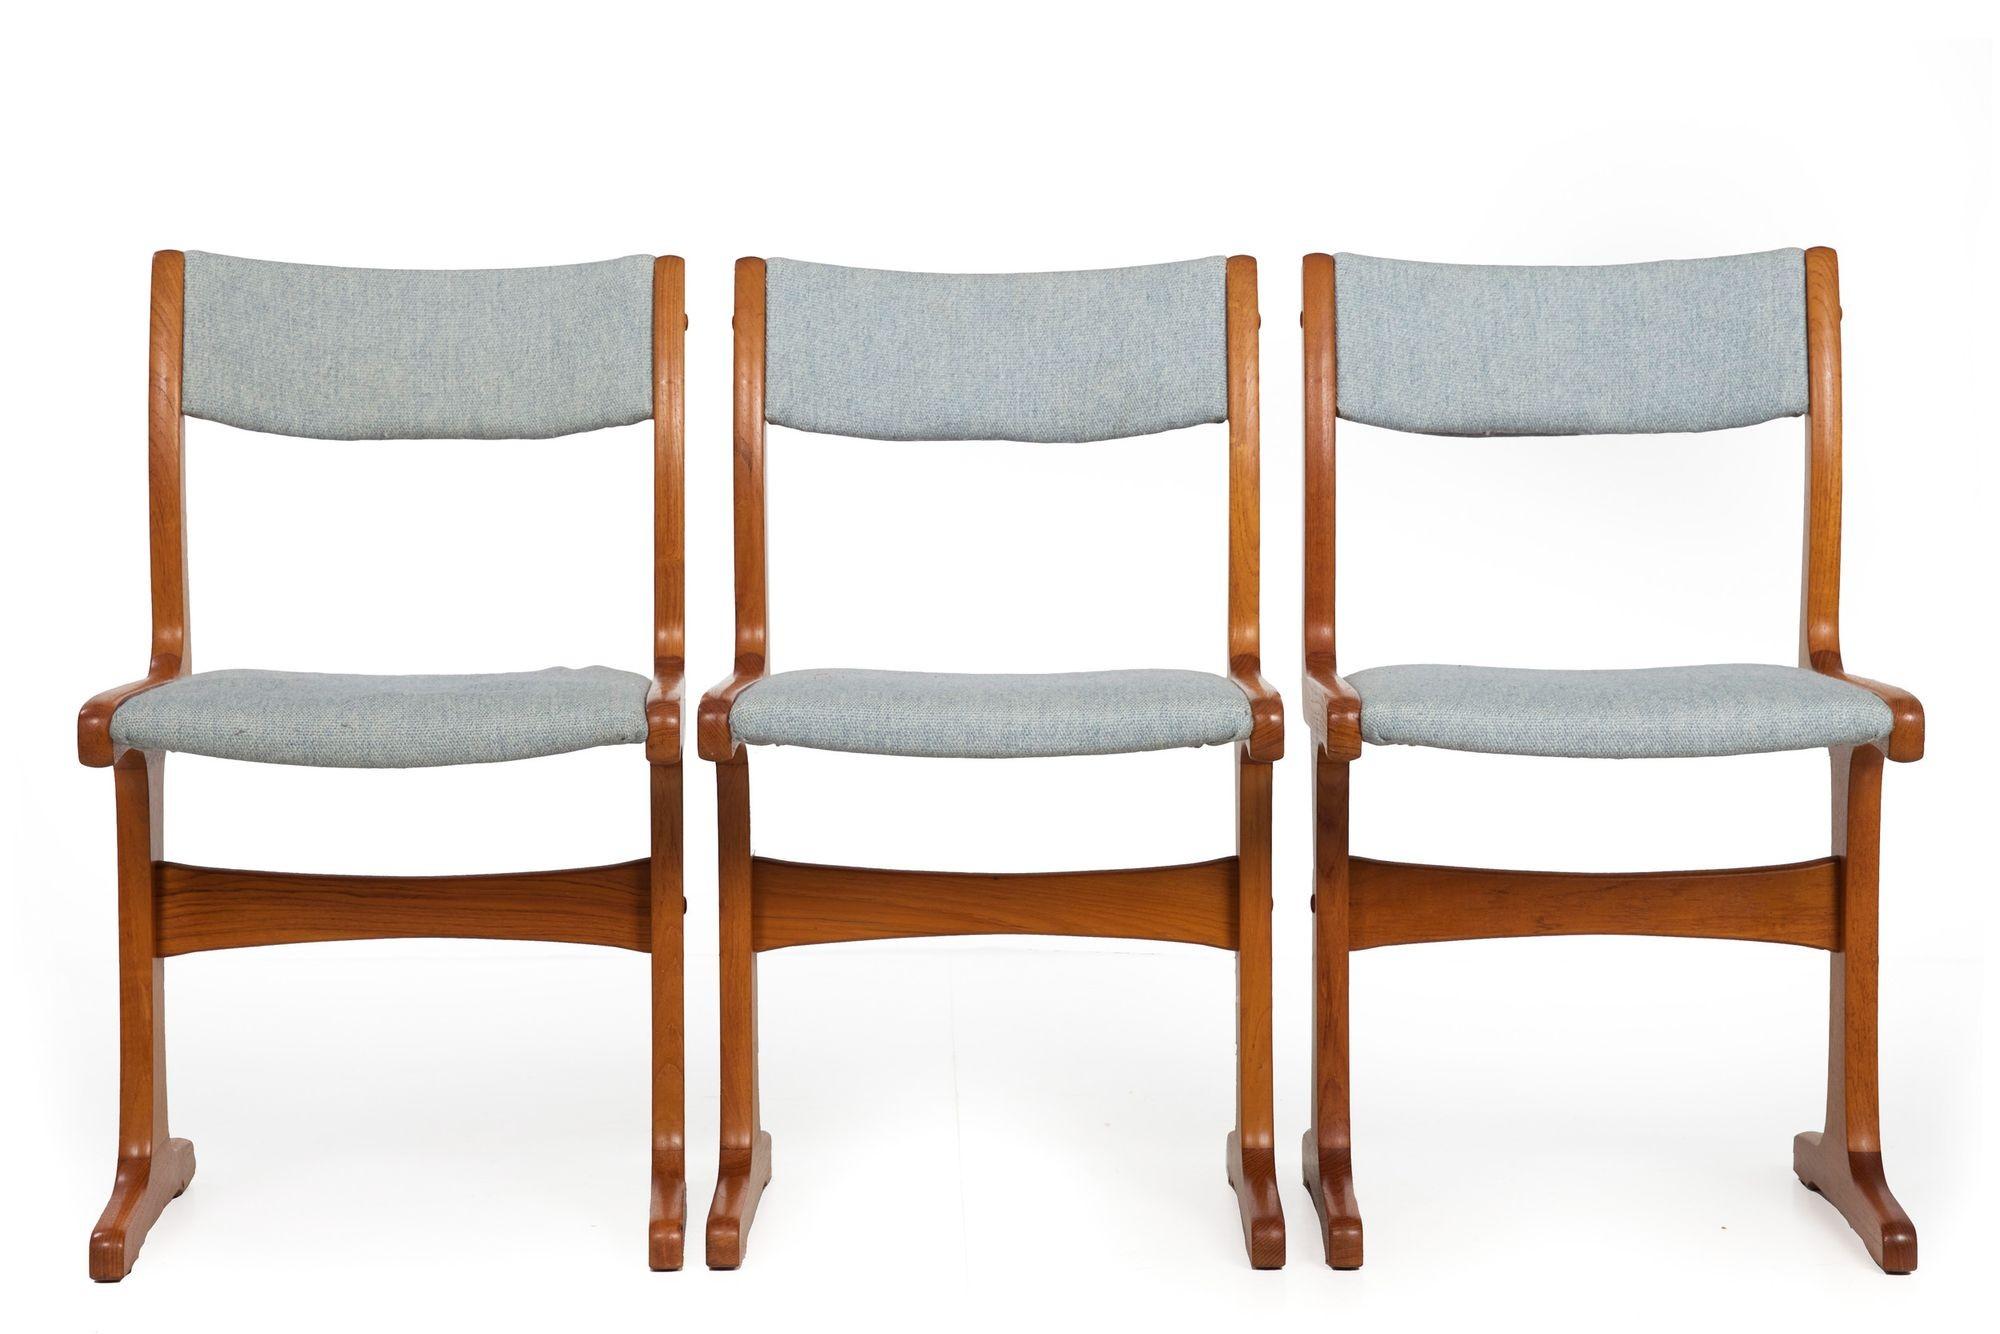 This lovely set of six dining chairs Gangso Møbler were made en suite with a dining table that we may still have available in the shop (sold separately, contact us or browse current inveSntory to see if it remains available). They feature an